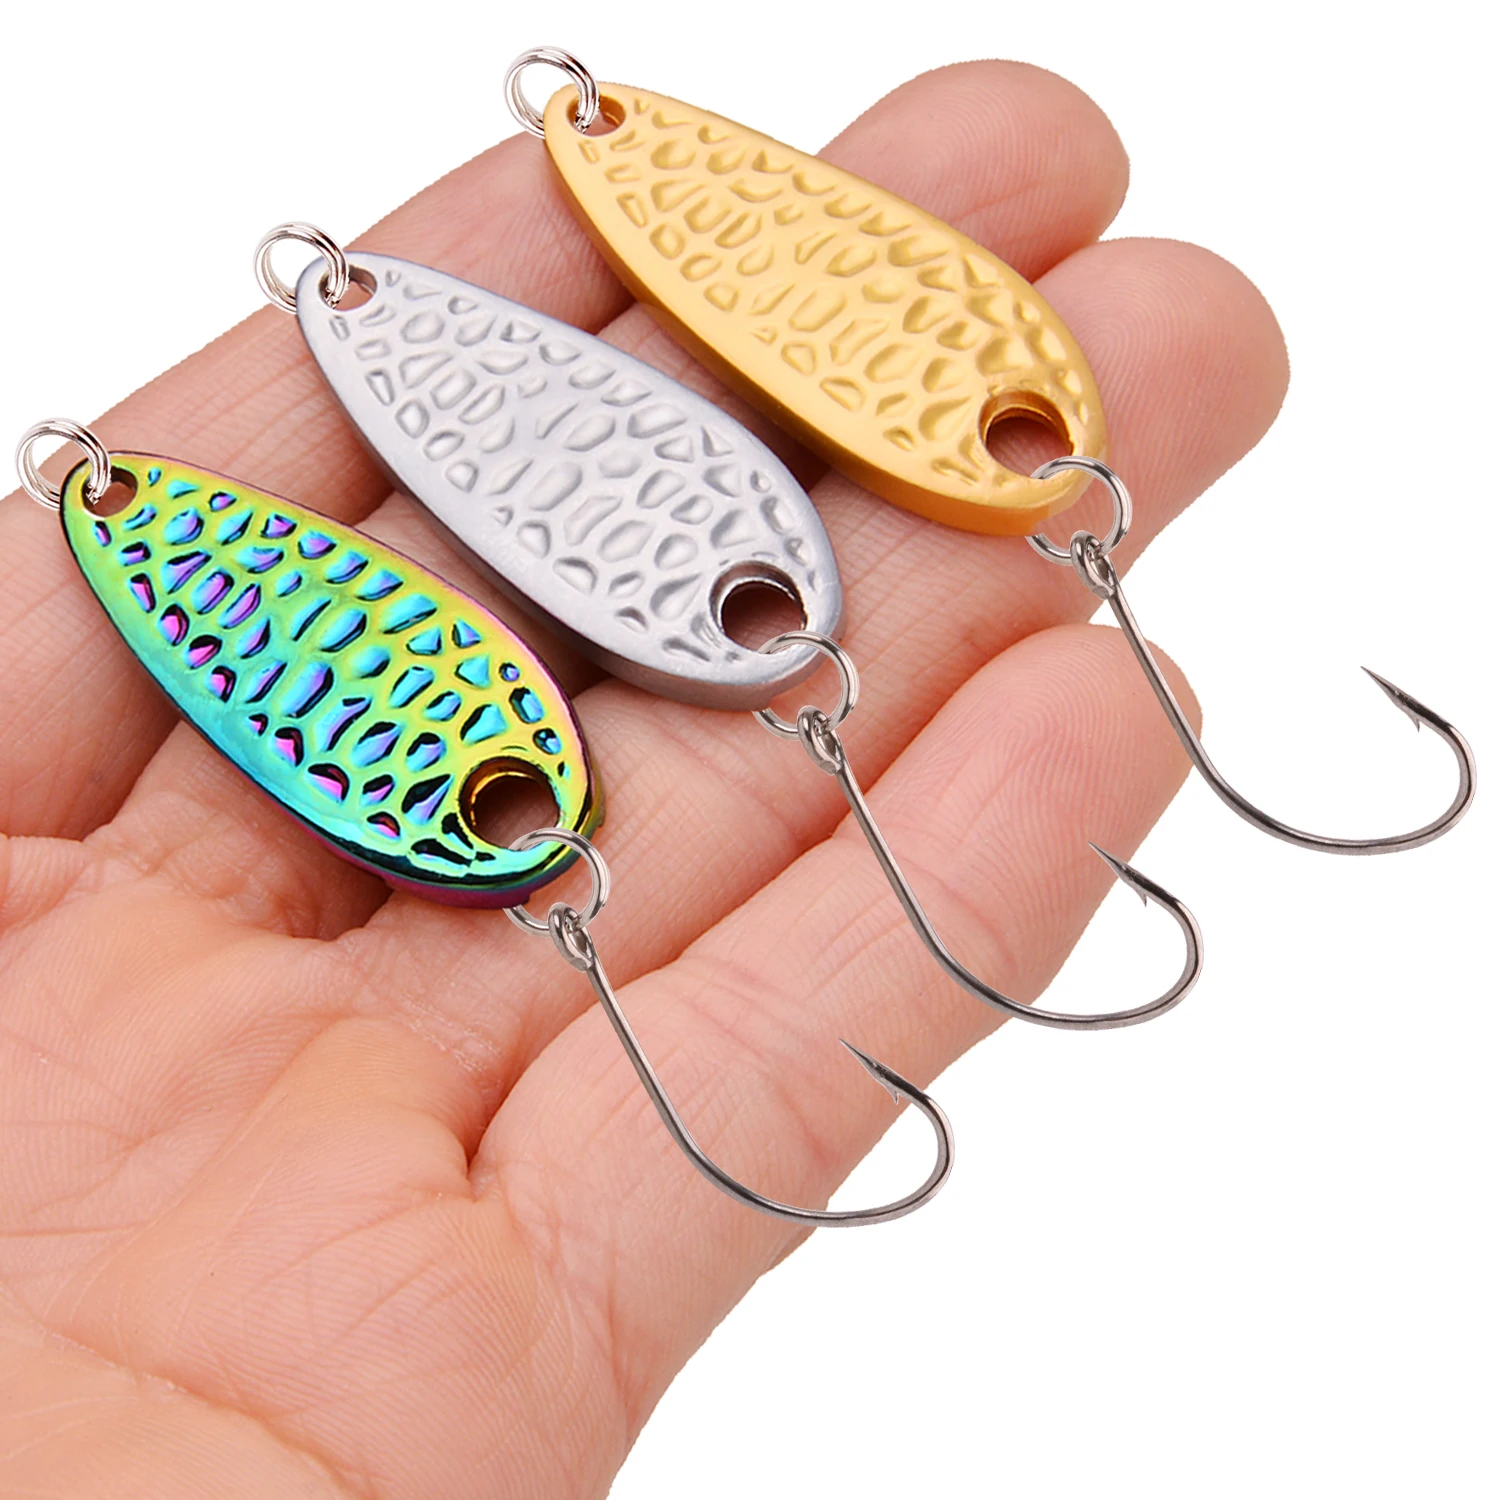 SPOON 2.5g 3.5g 5g 7g Unpainted Spoon Bait Golden Copper DIY Blank Metal  Fishing Lures For Trout Perch Salmon - AliExpress